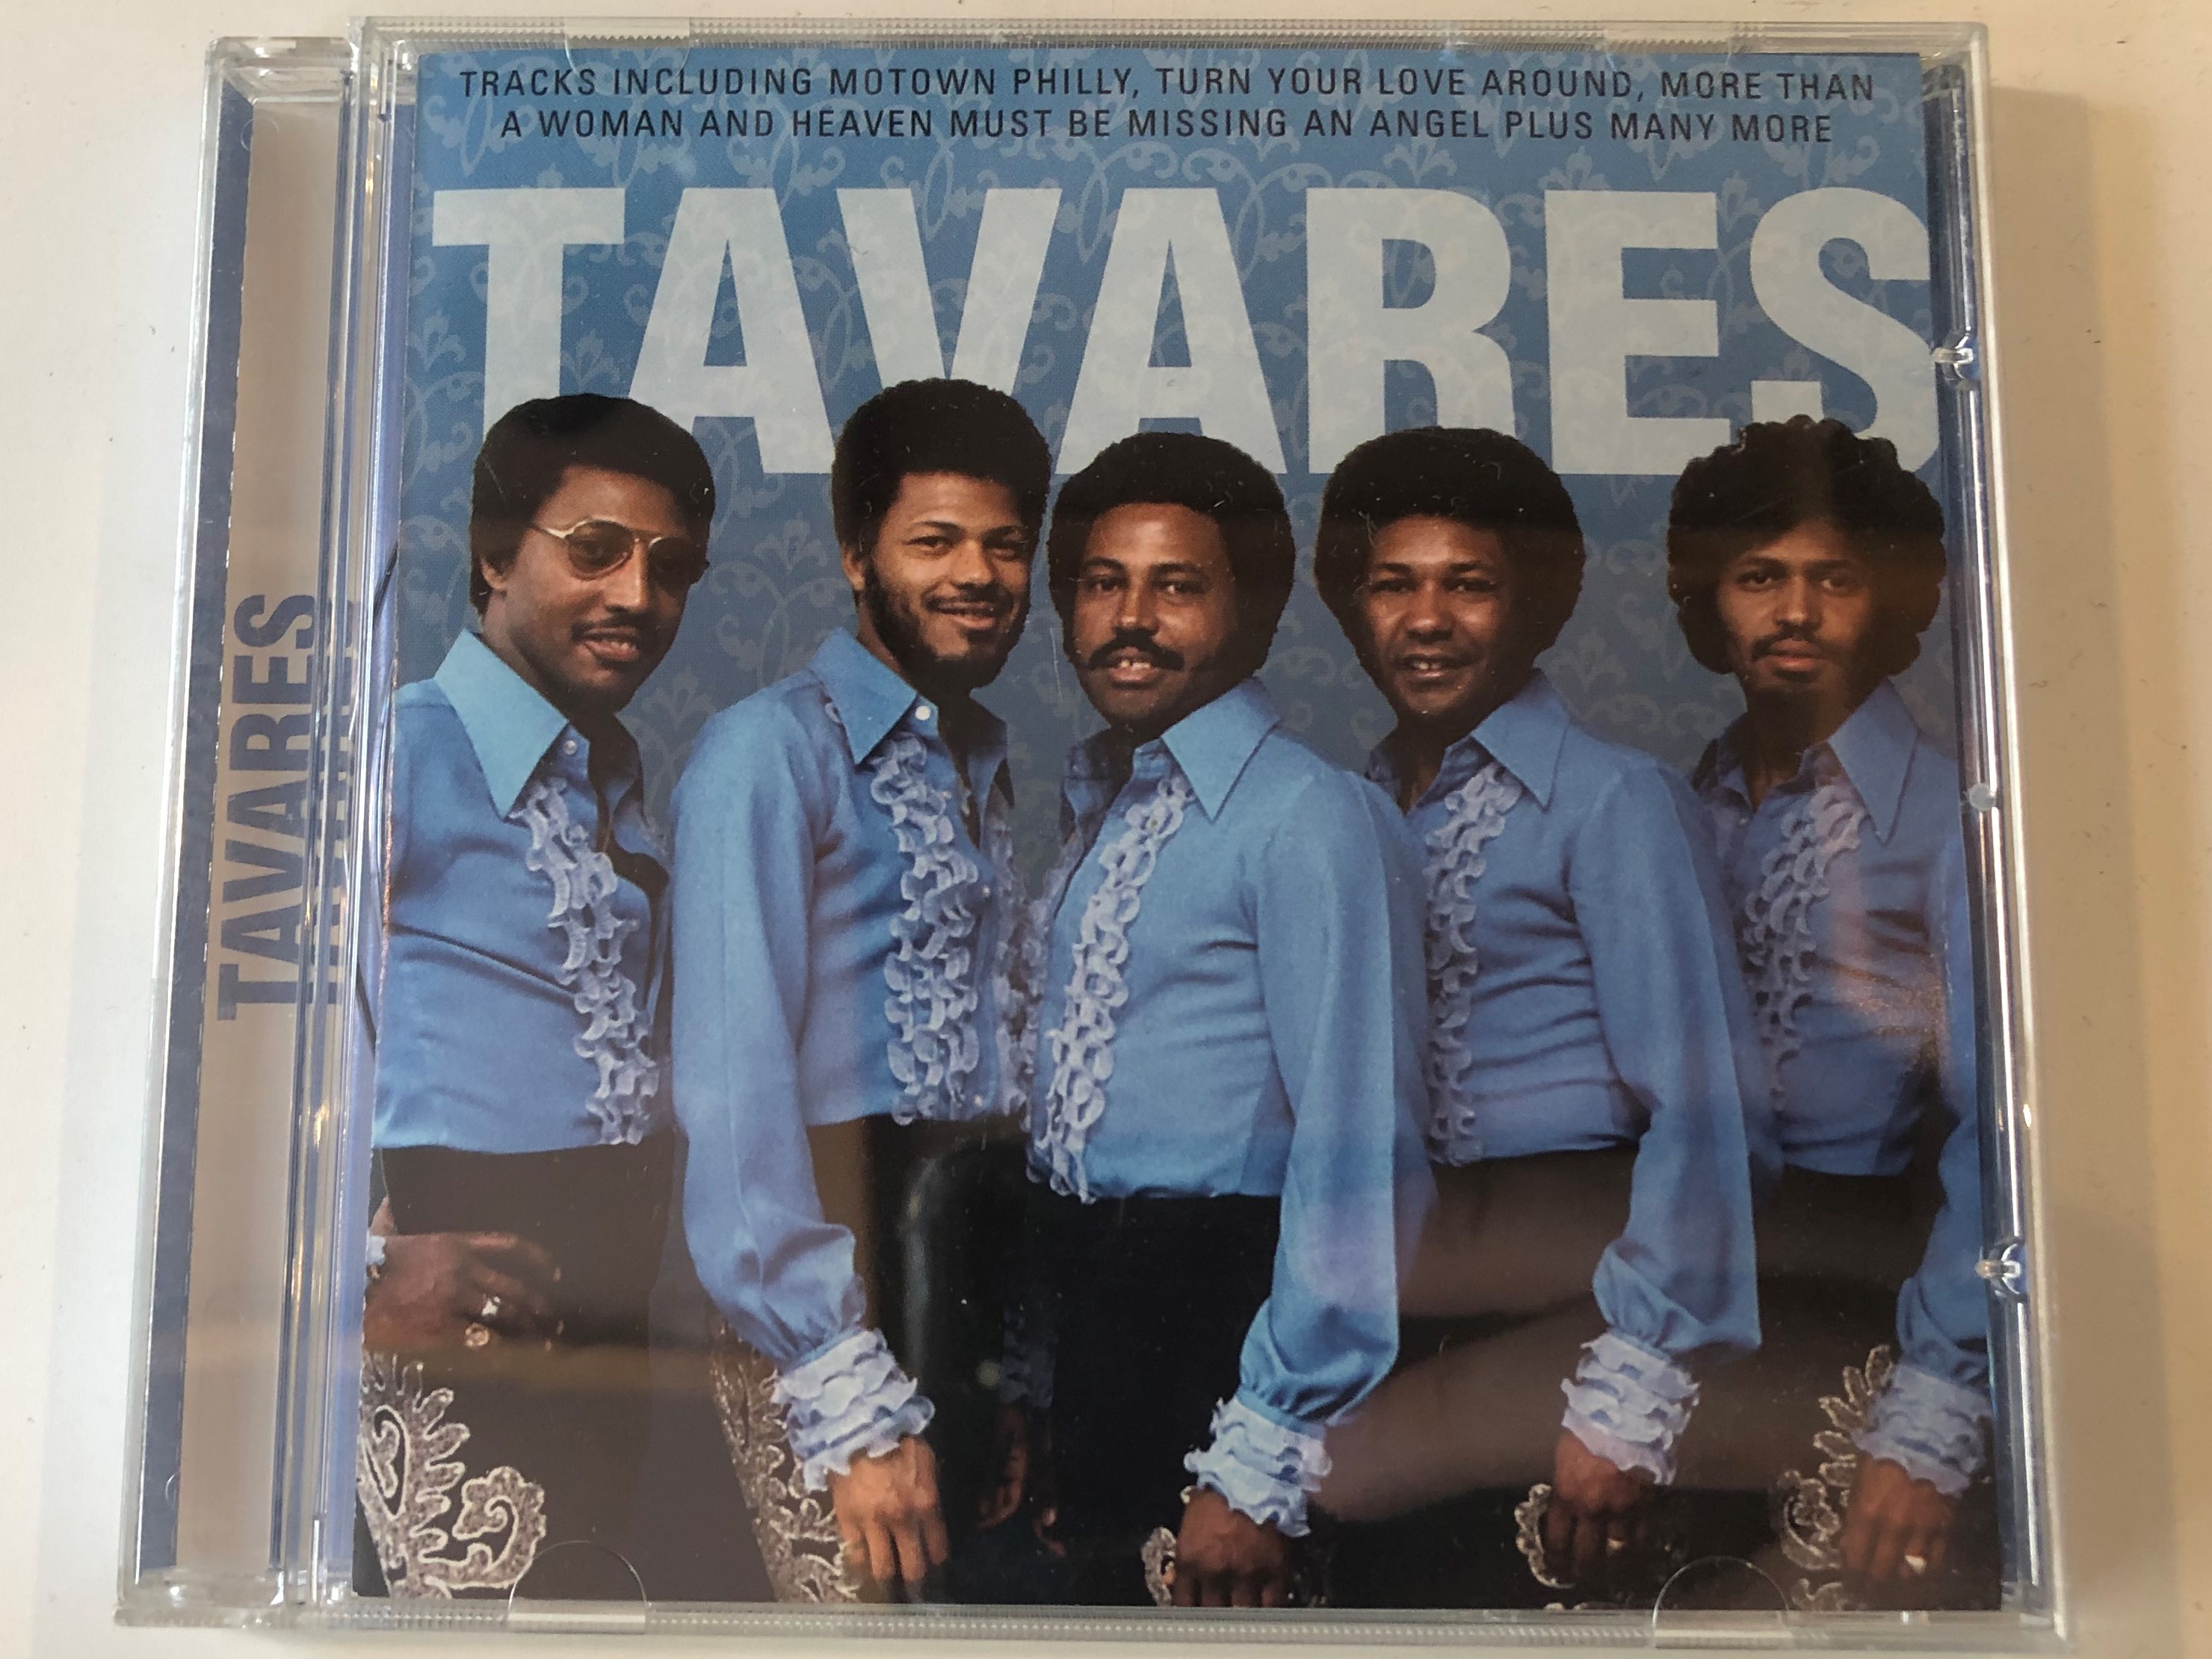 tavares-track-including-mottown-philly-turn-your-love-around-more-than-a-woman-and-heaven-must-be-missing-an-angel-plus-many-more-play-24-7-audio-cd-2007-5051503107715-1-.jpg